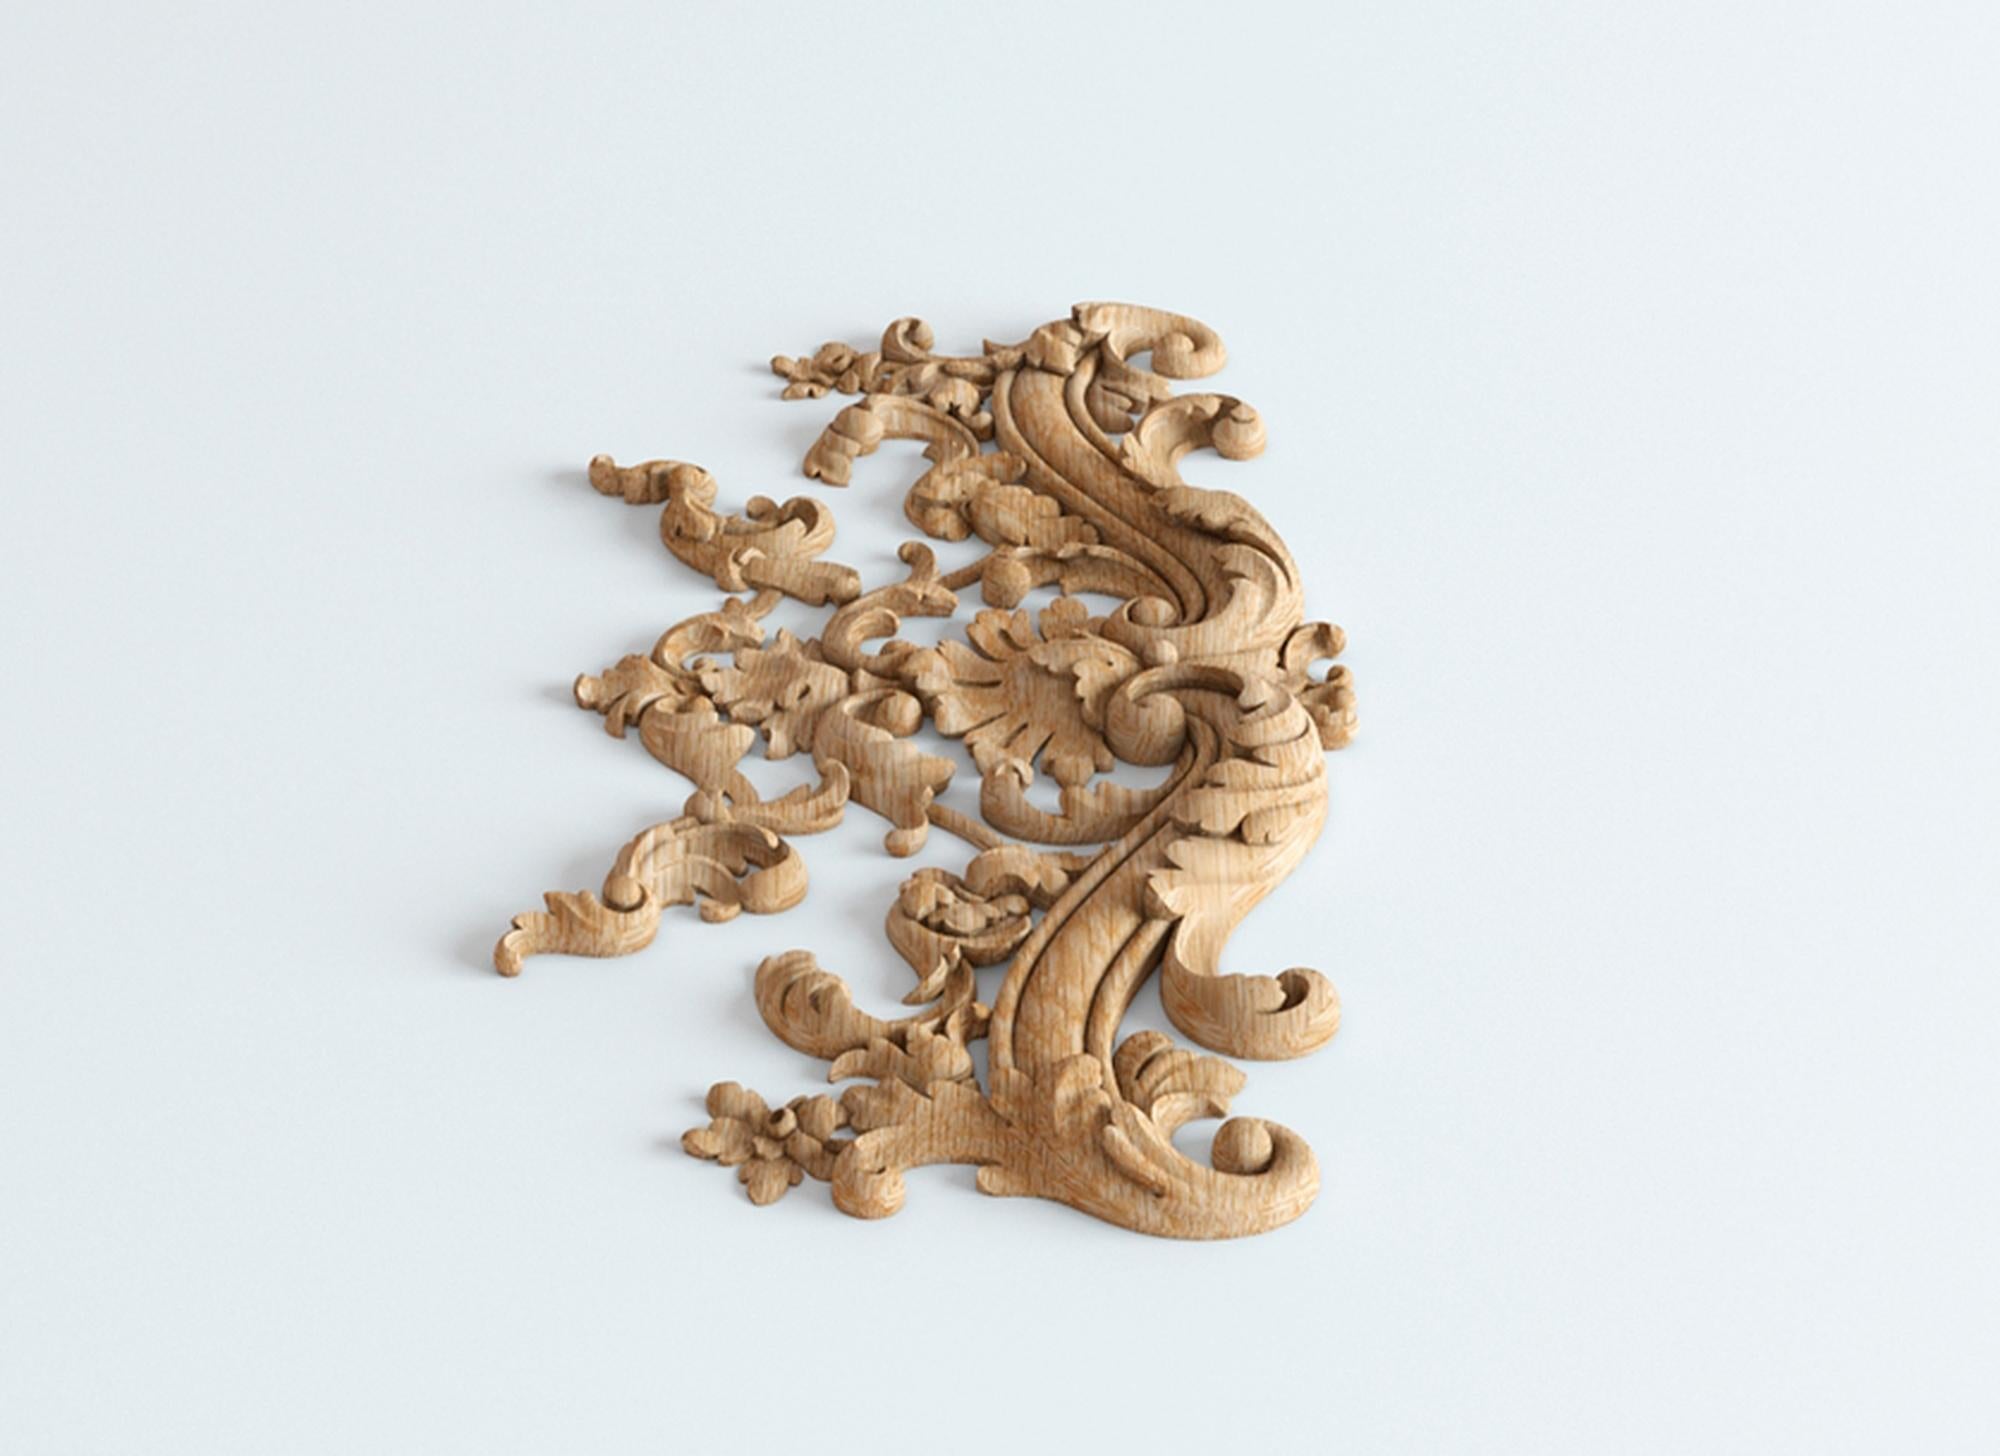 High quality decorative carved wood onlay. Material: oak or beech of your choice. Unpainted.

>> SKU: N-406

>> Dimensions (A x B x C):

1) 11.02